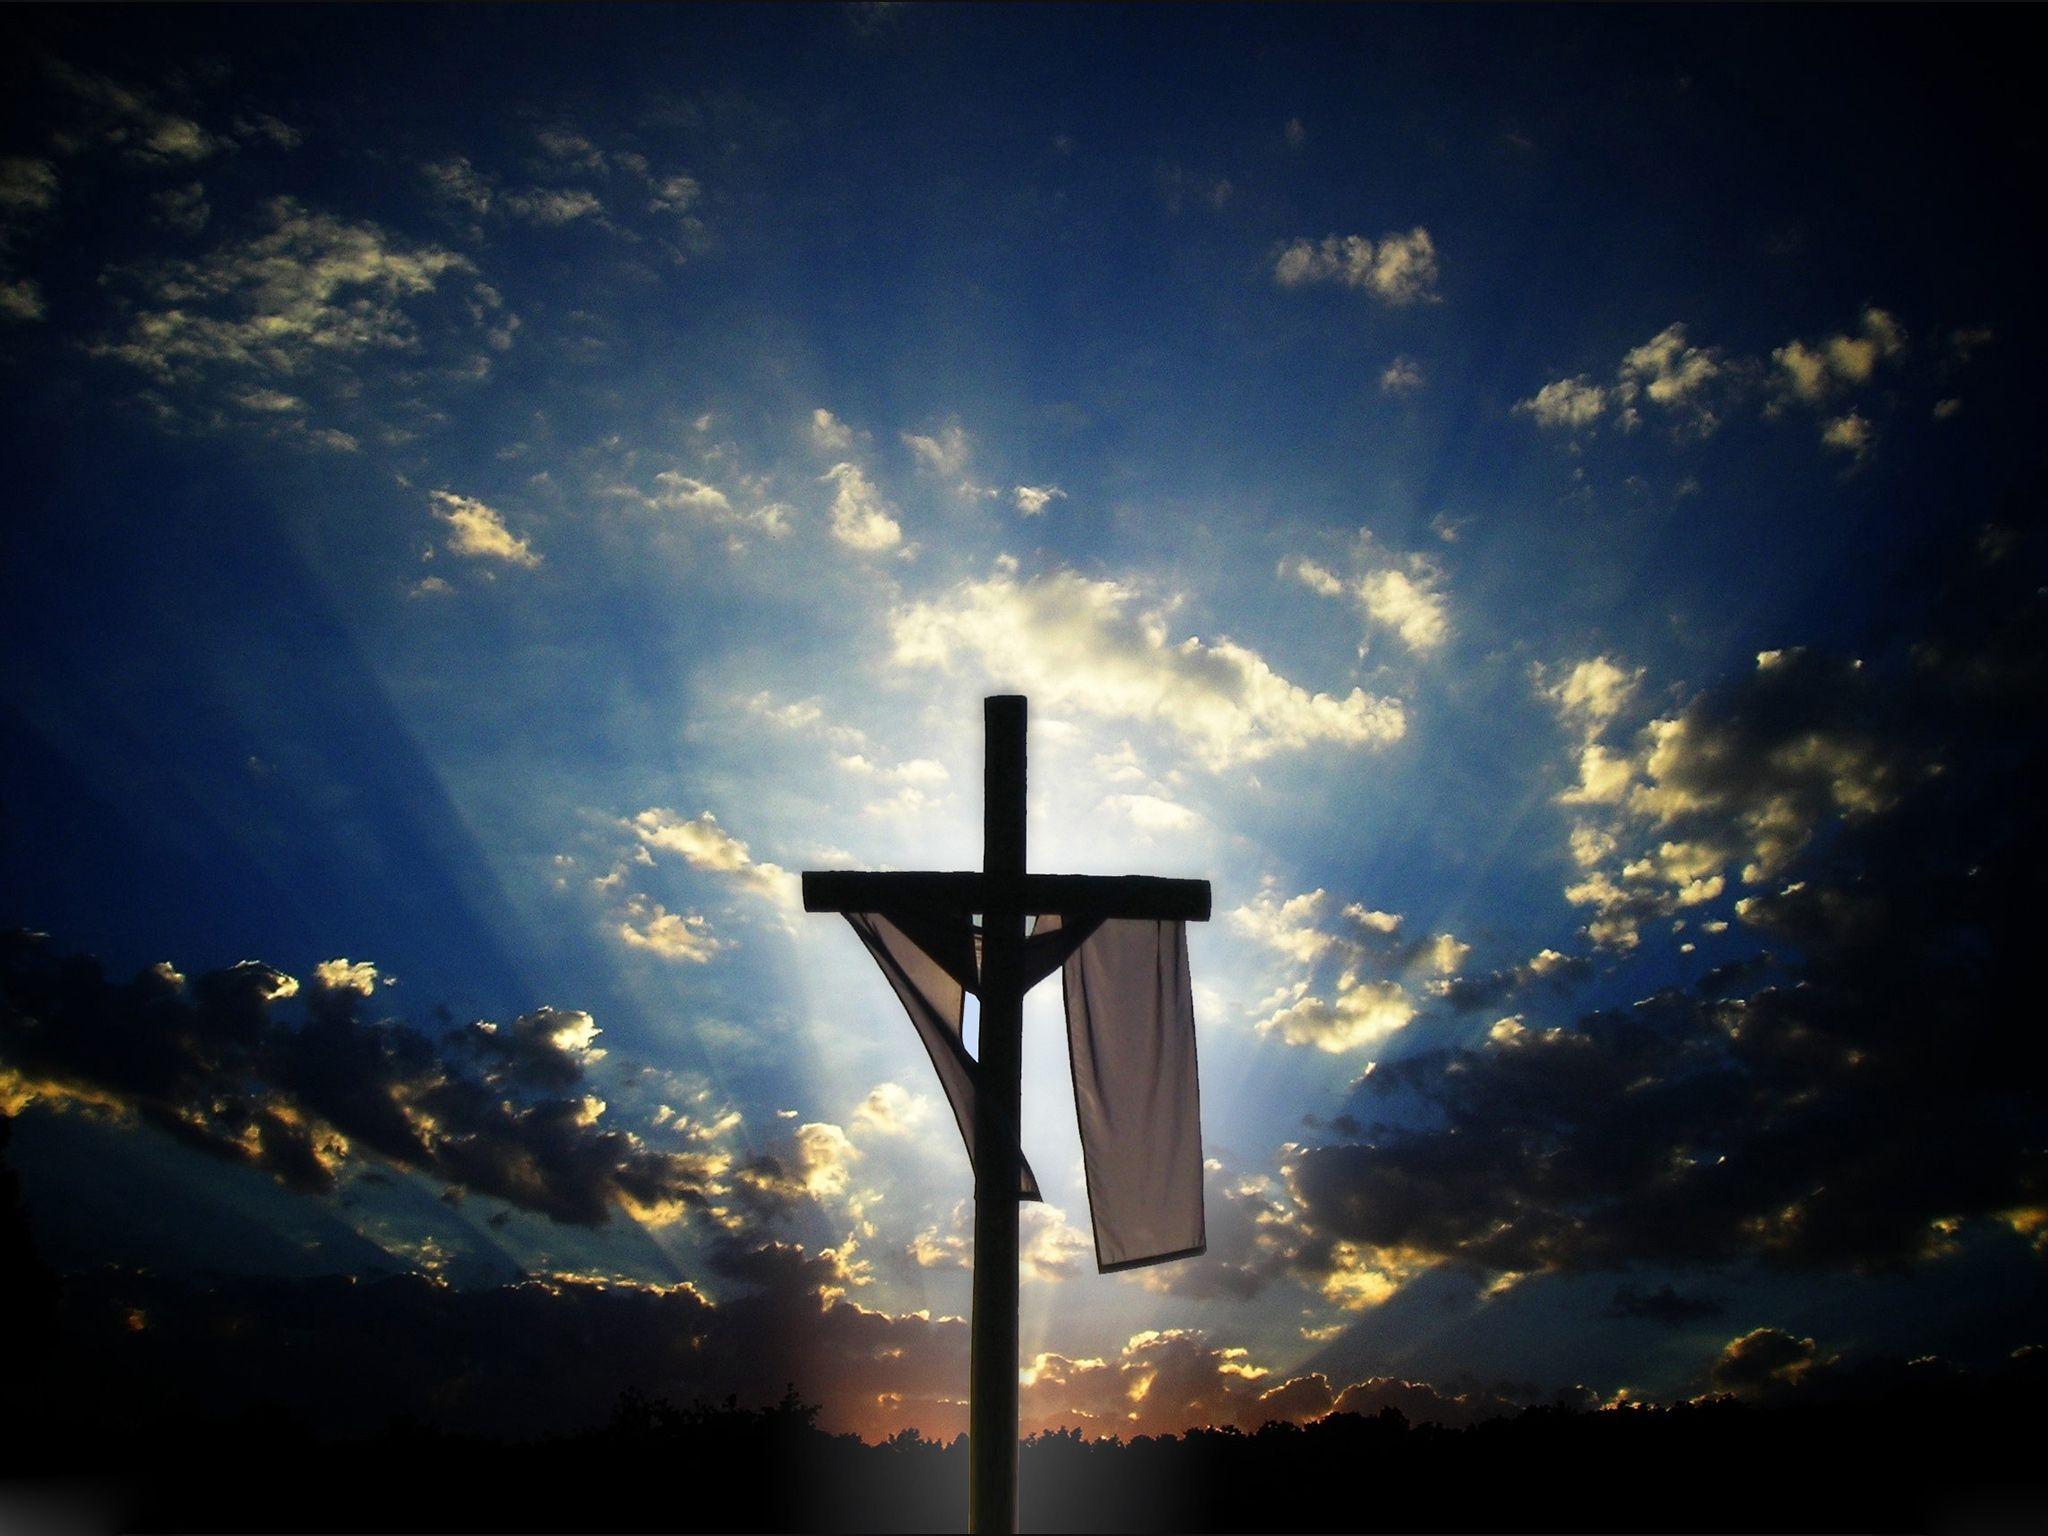 Christian Cross With Jesus Christ In Beautiful Sunrise Wallpapers